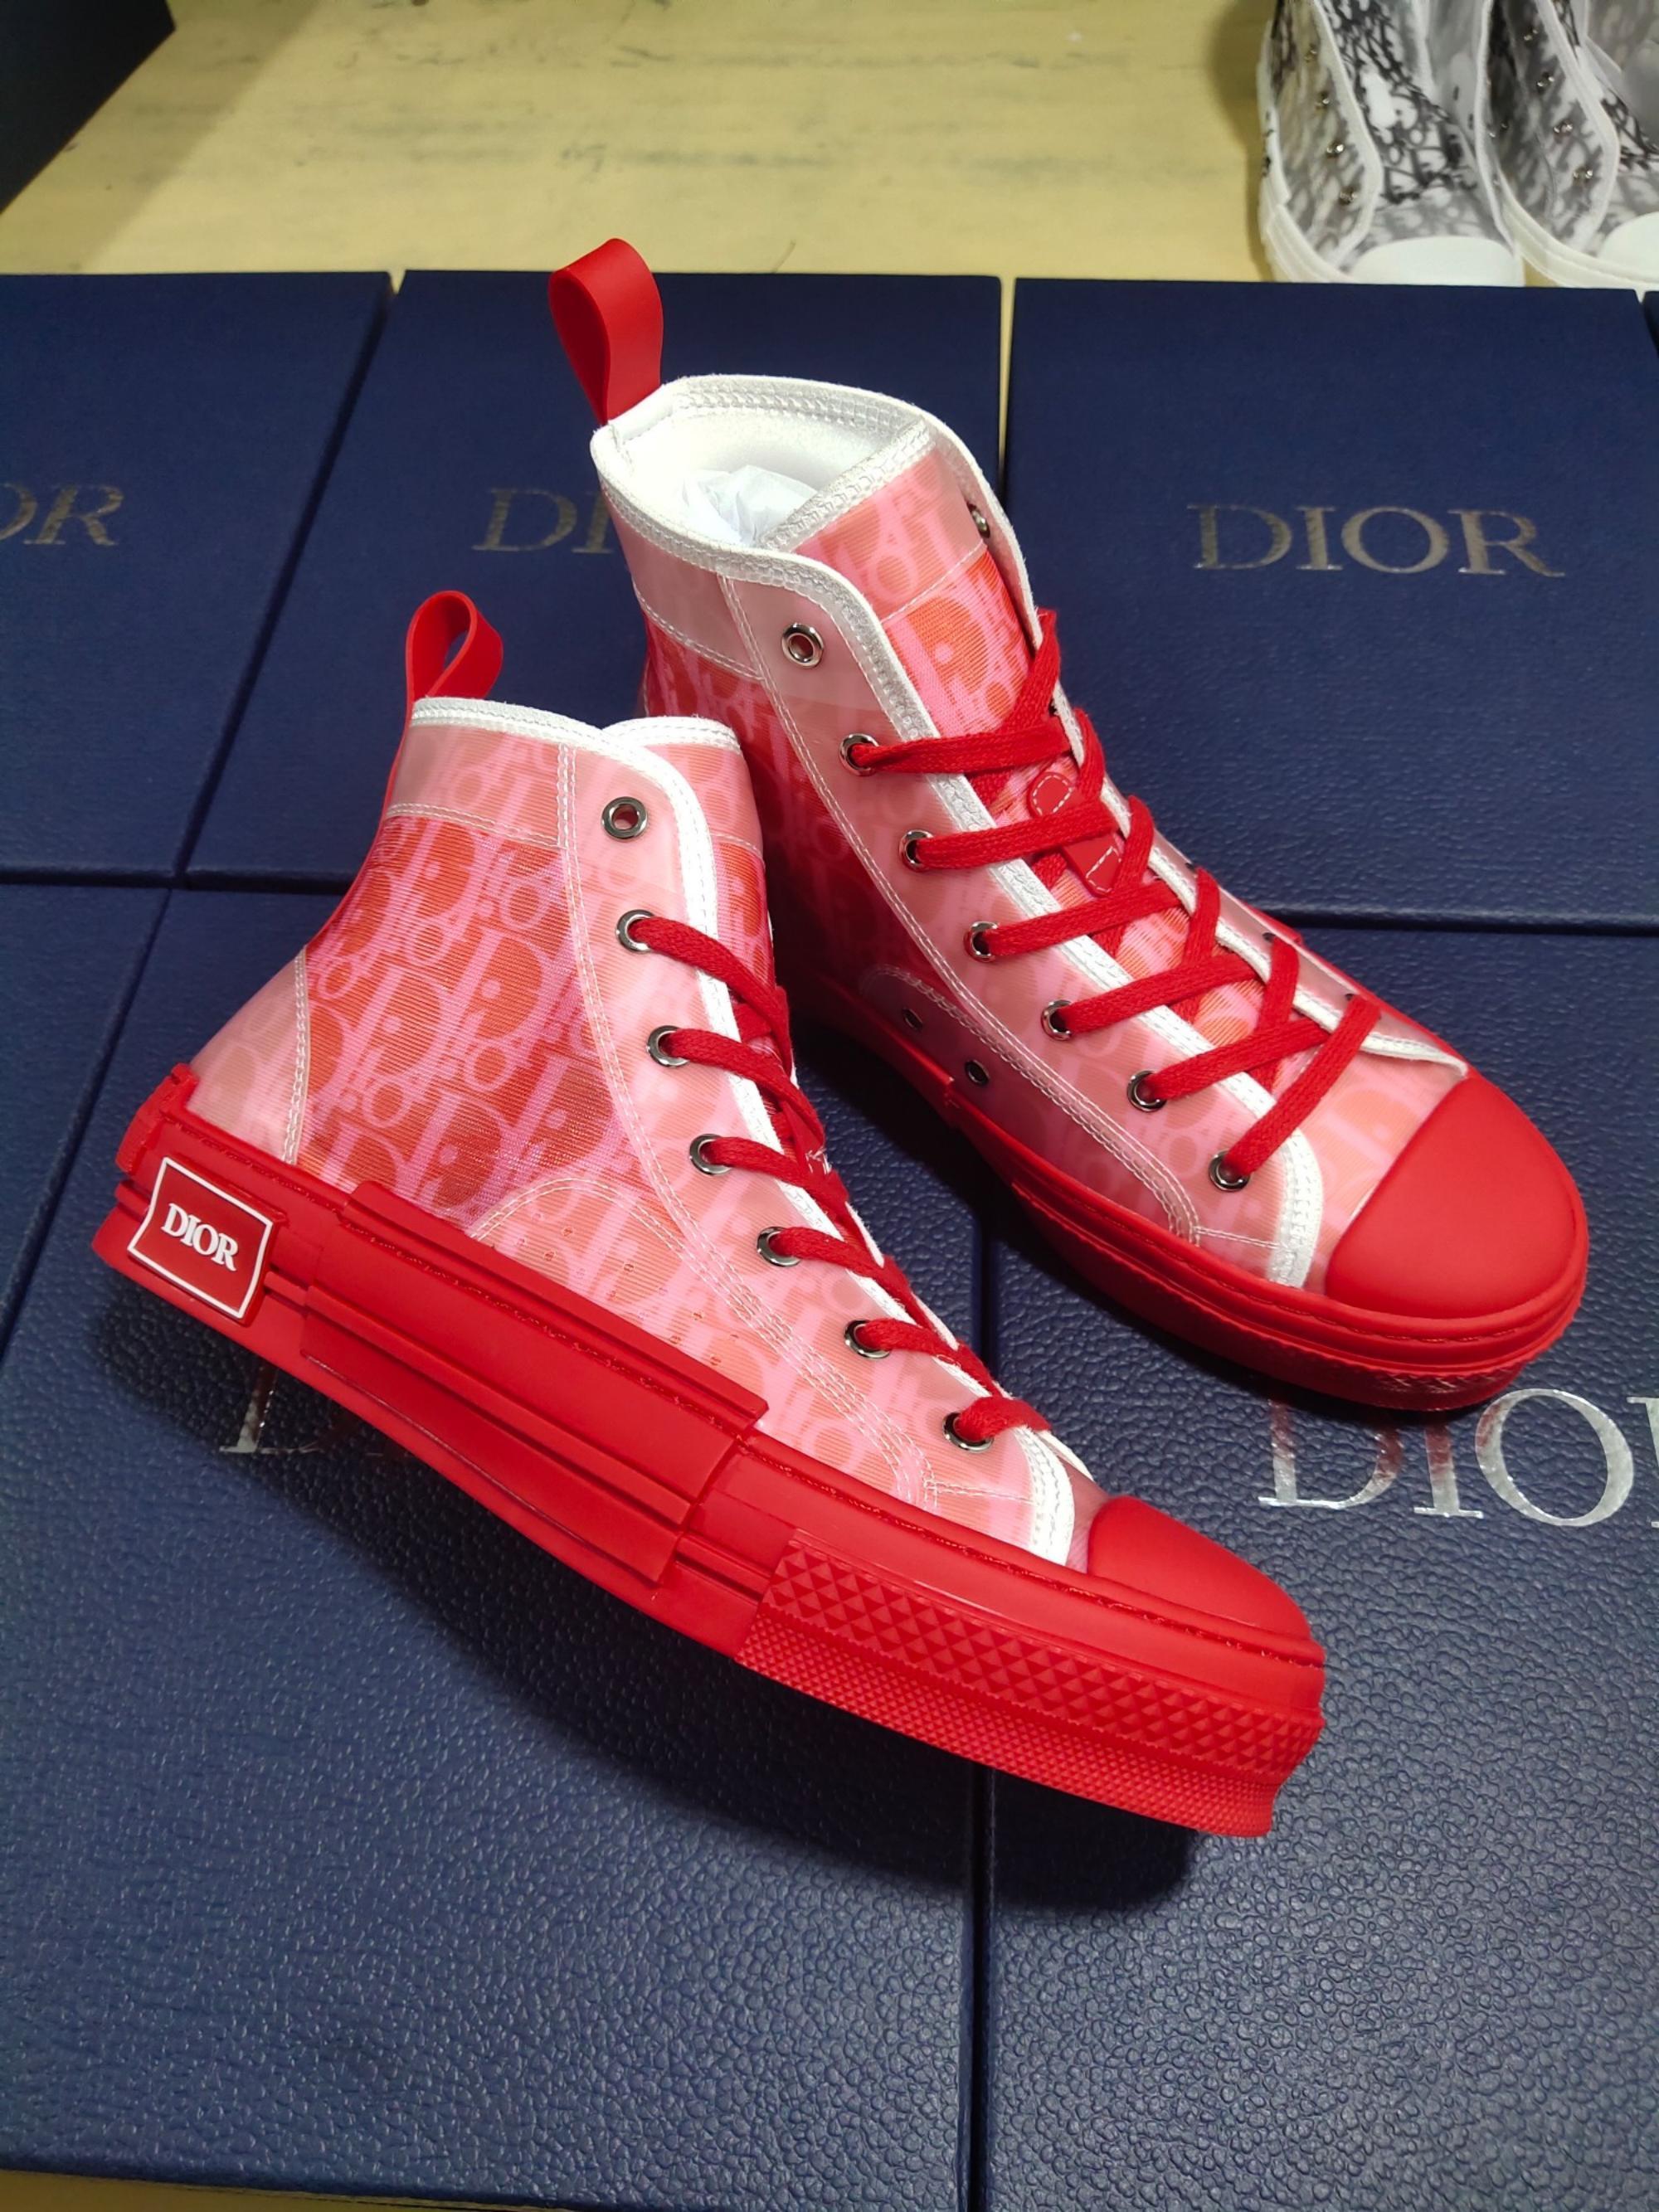 2021 New Dior Men and women Leather HIGH TOP Casual Sports Sneak